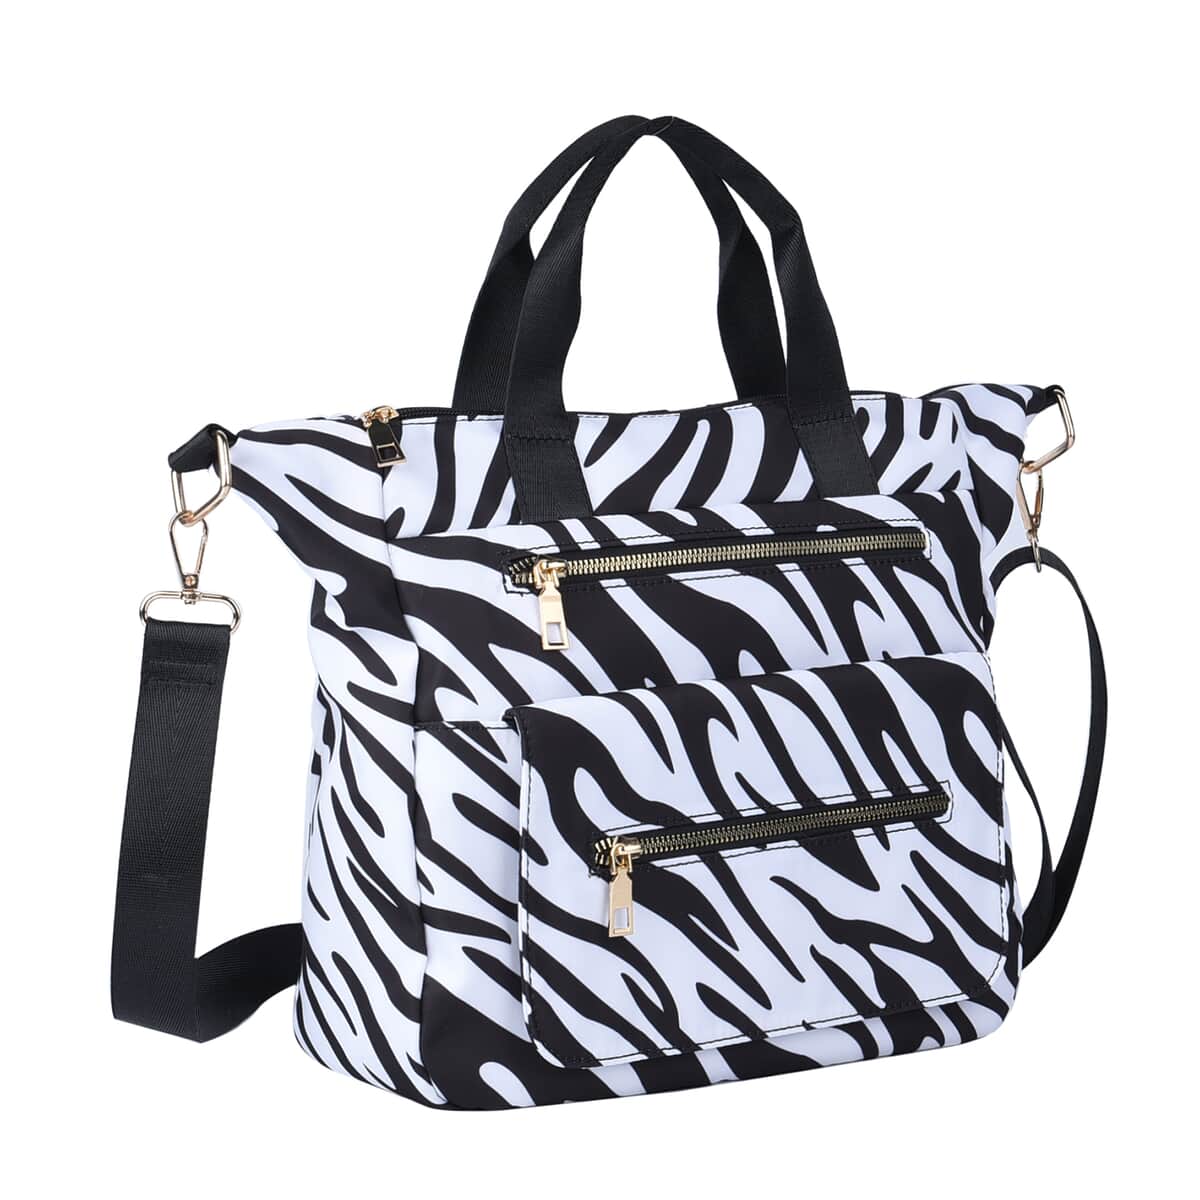 Black Color White Zebra Pattern Nylon Convertible Bag (12"x4"x11.5") with Handle and Shoulder Strap image number 6